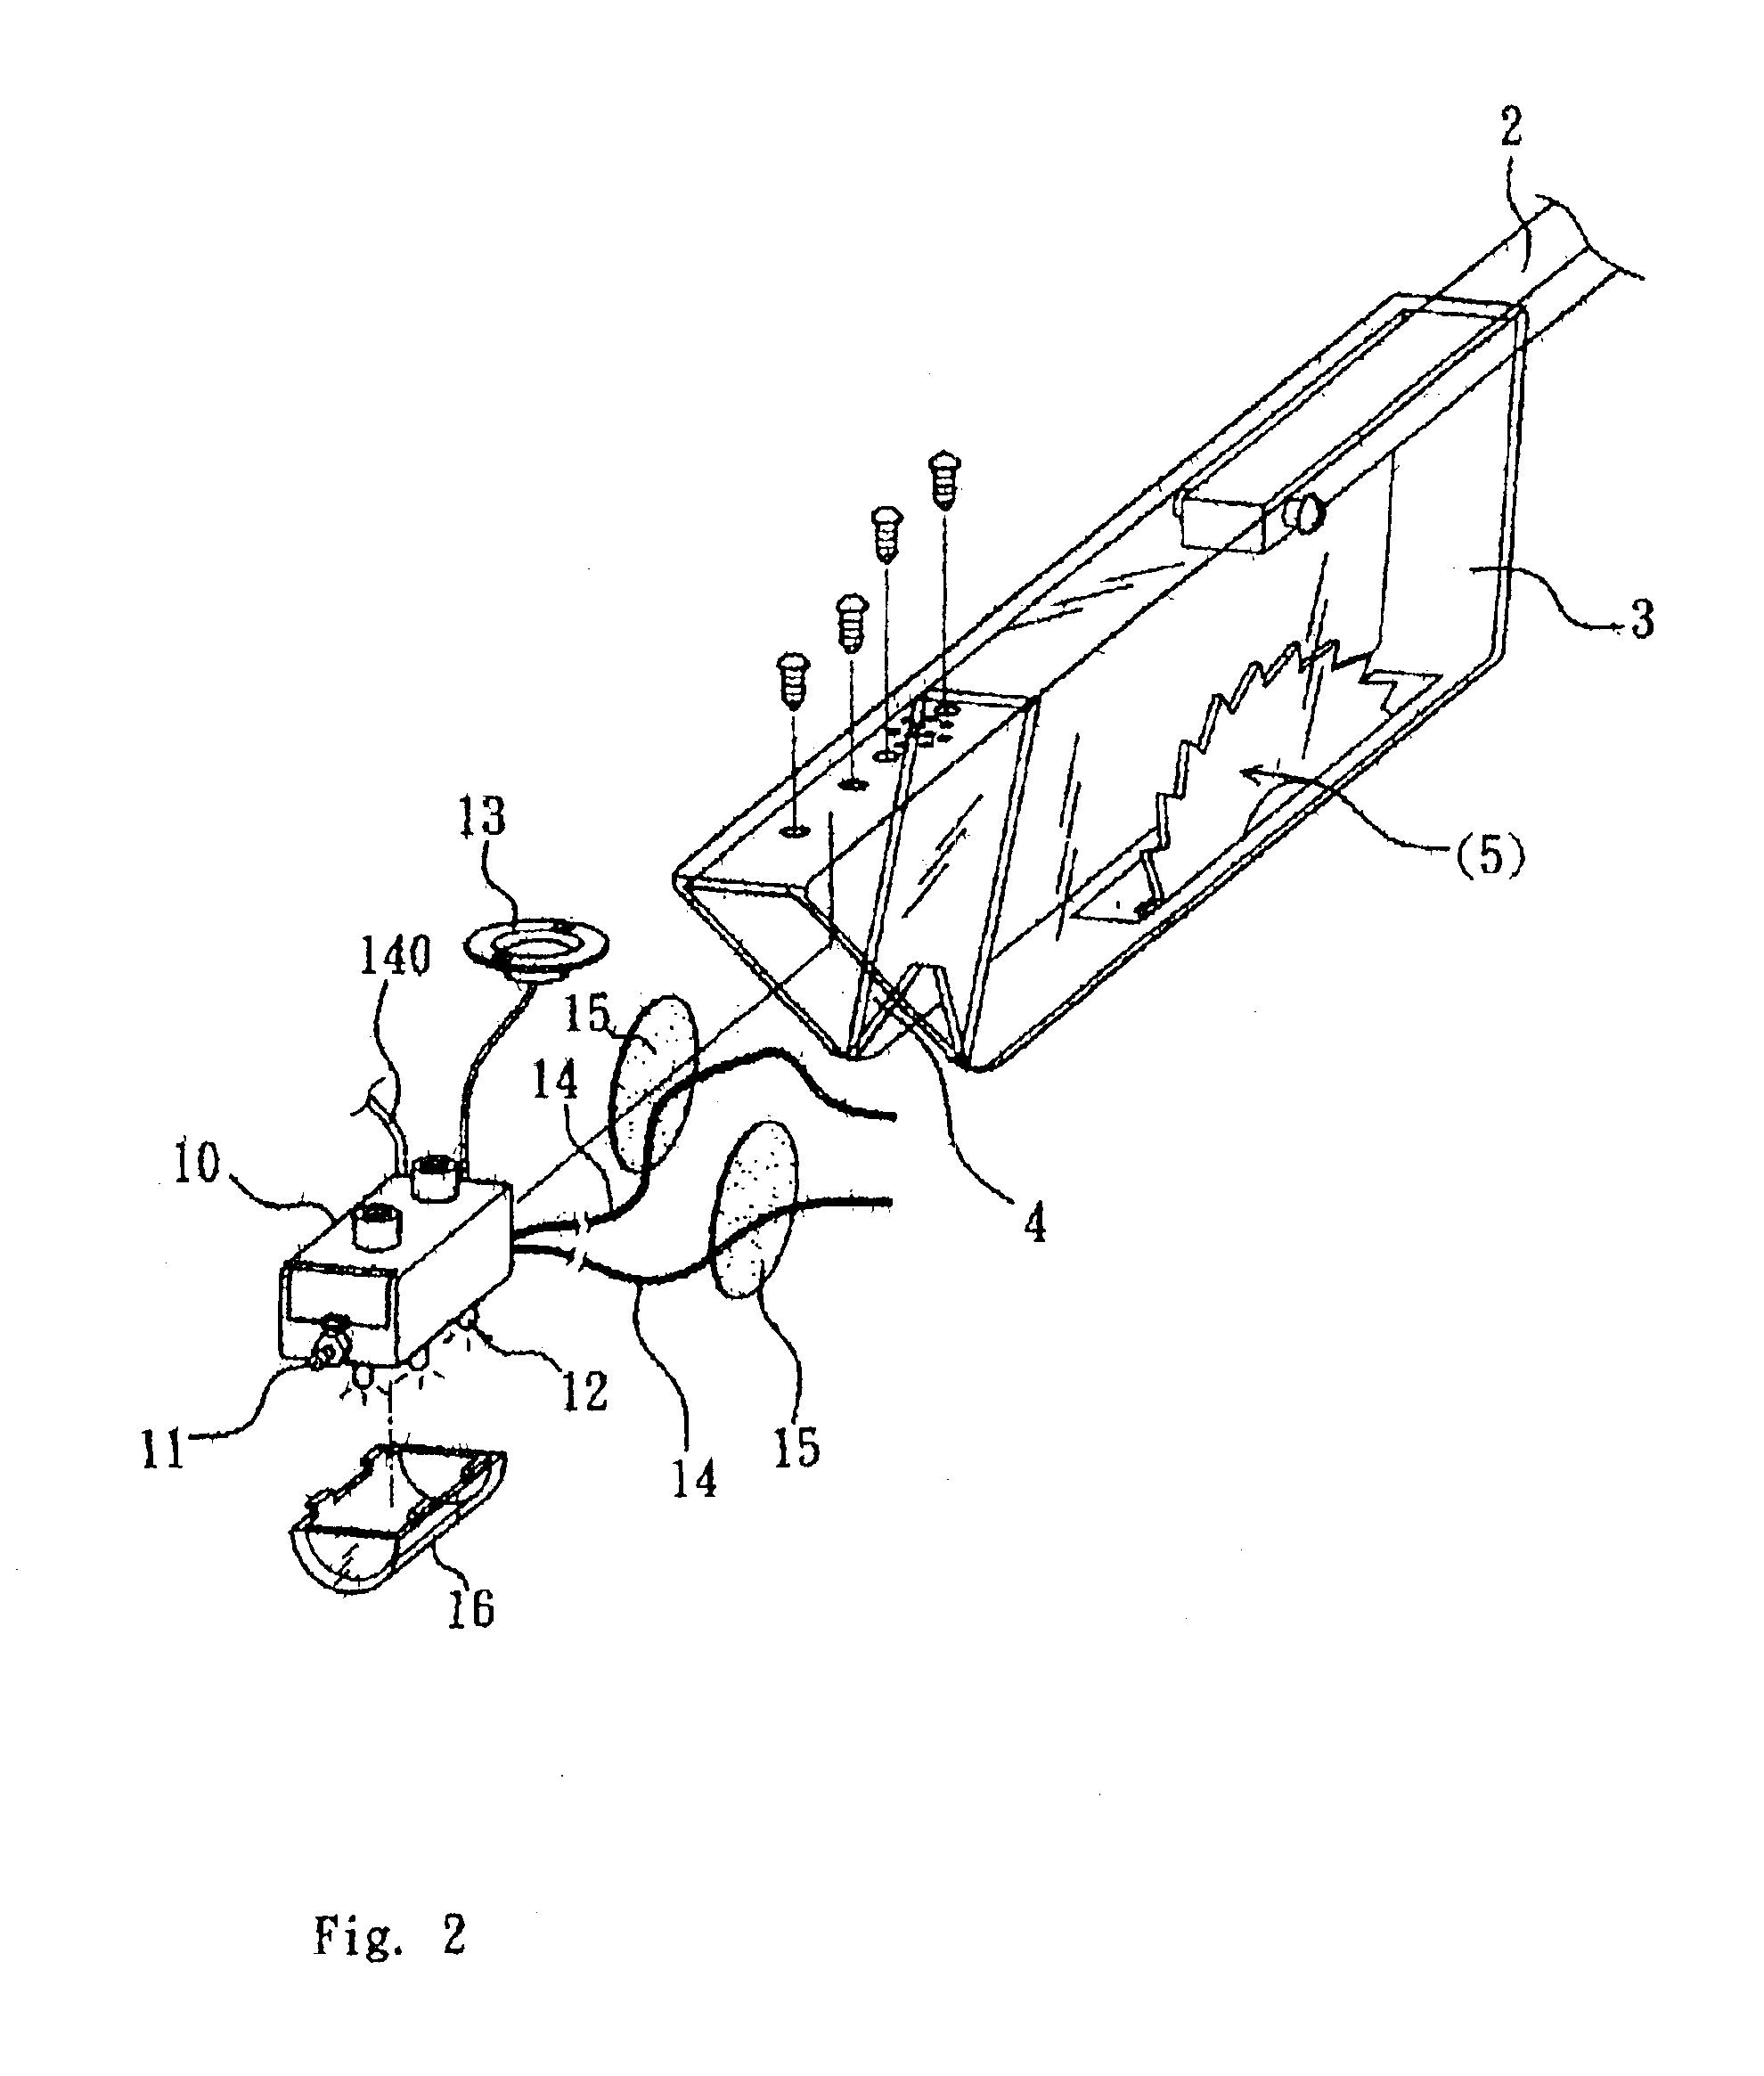 Saw cover safety sensing device